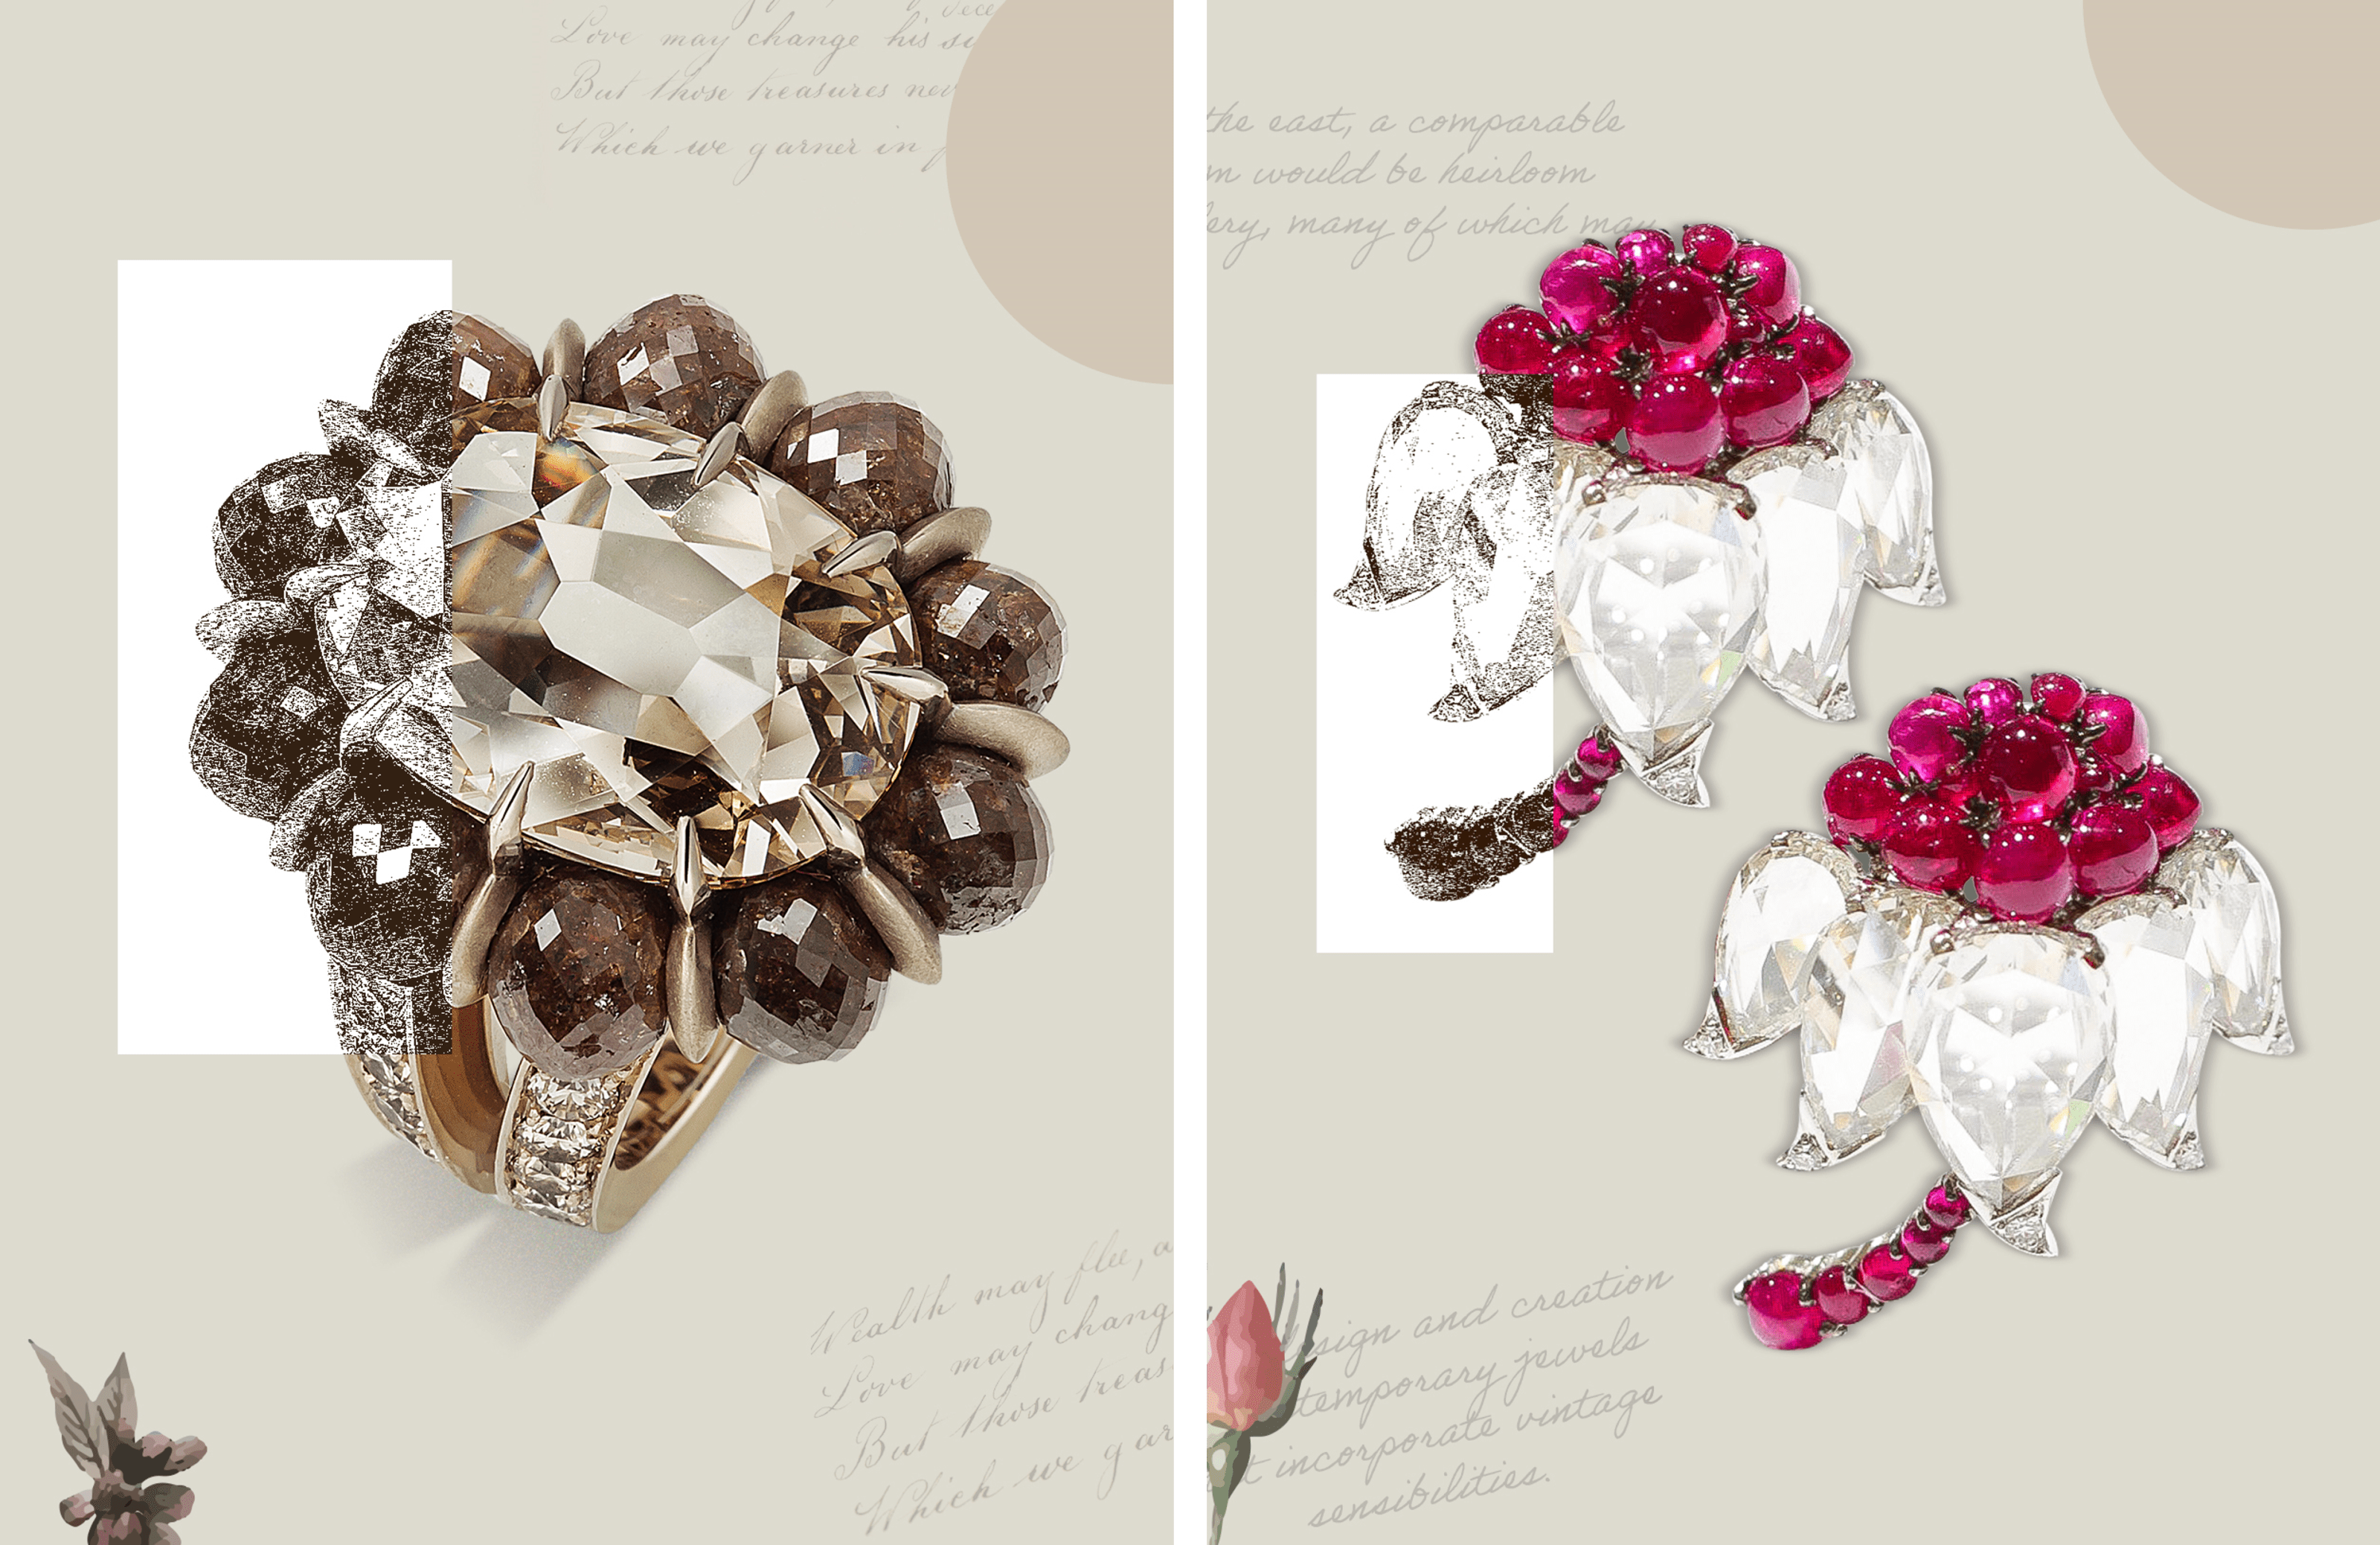 Hemmerle ring, featuring a Fancy Light Yellowish-Brown diamond and Ruby Lotus earrings by Viren Bhagat